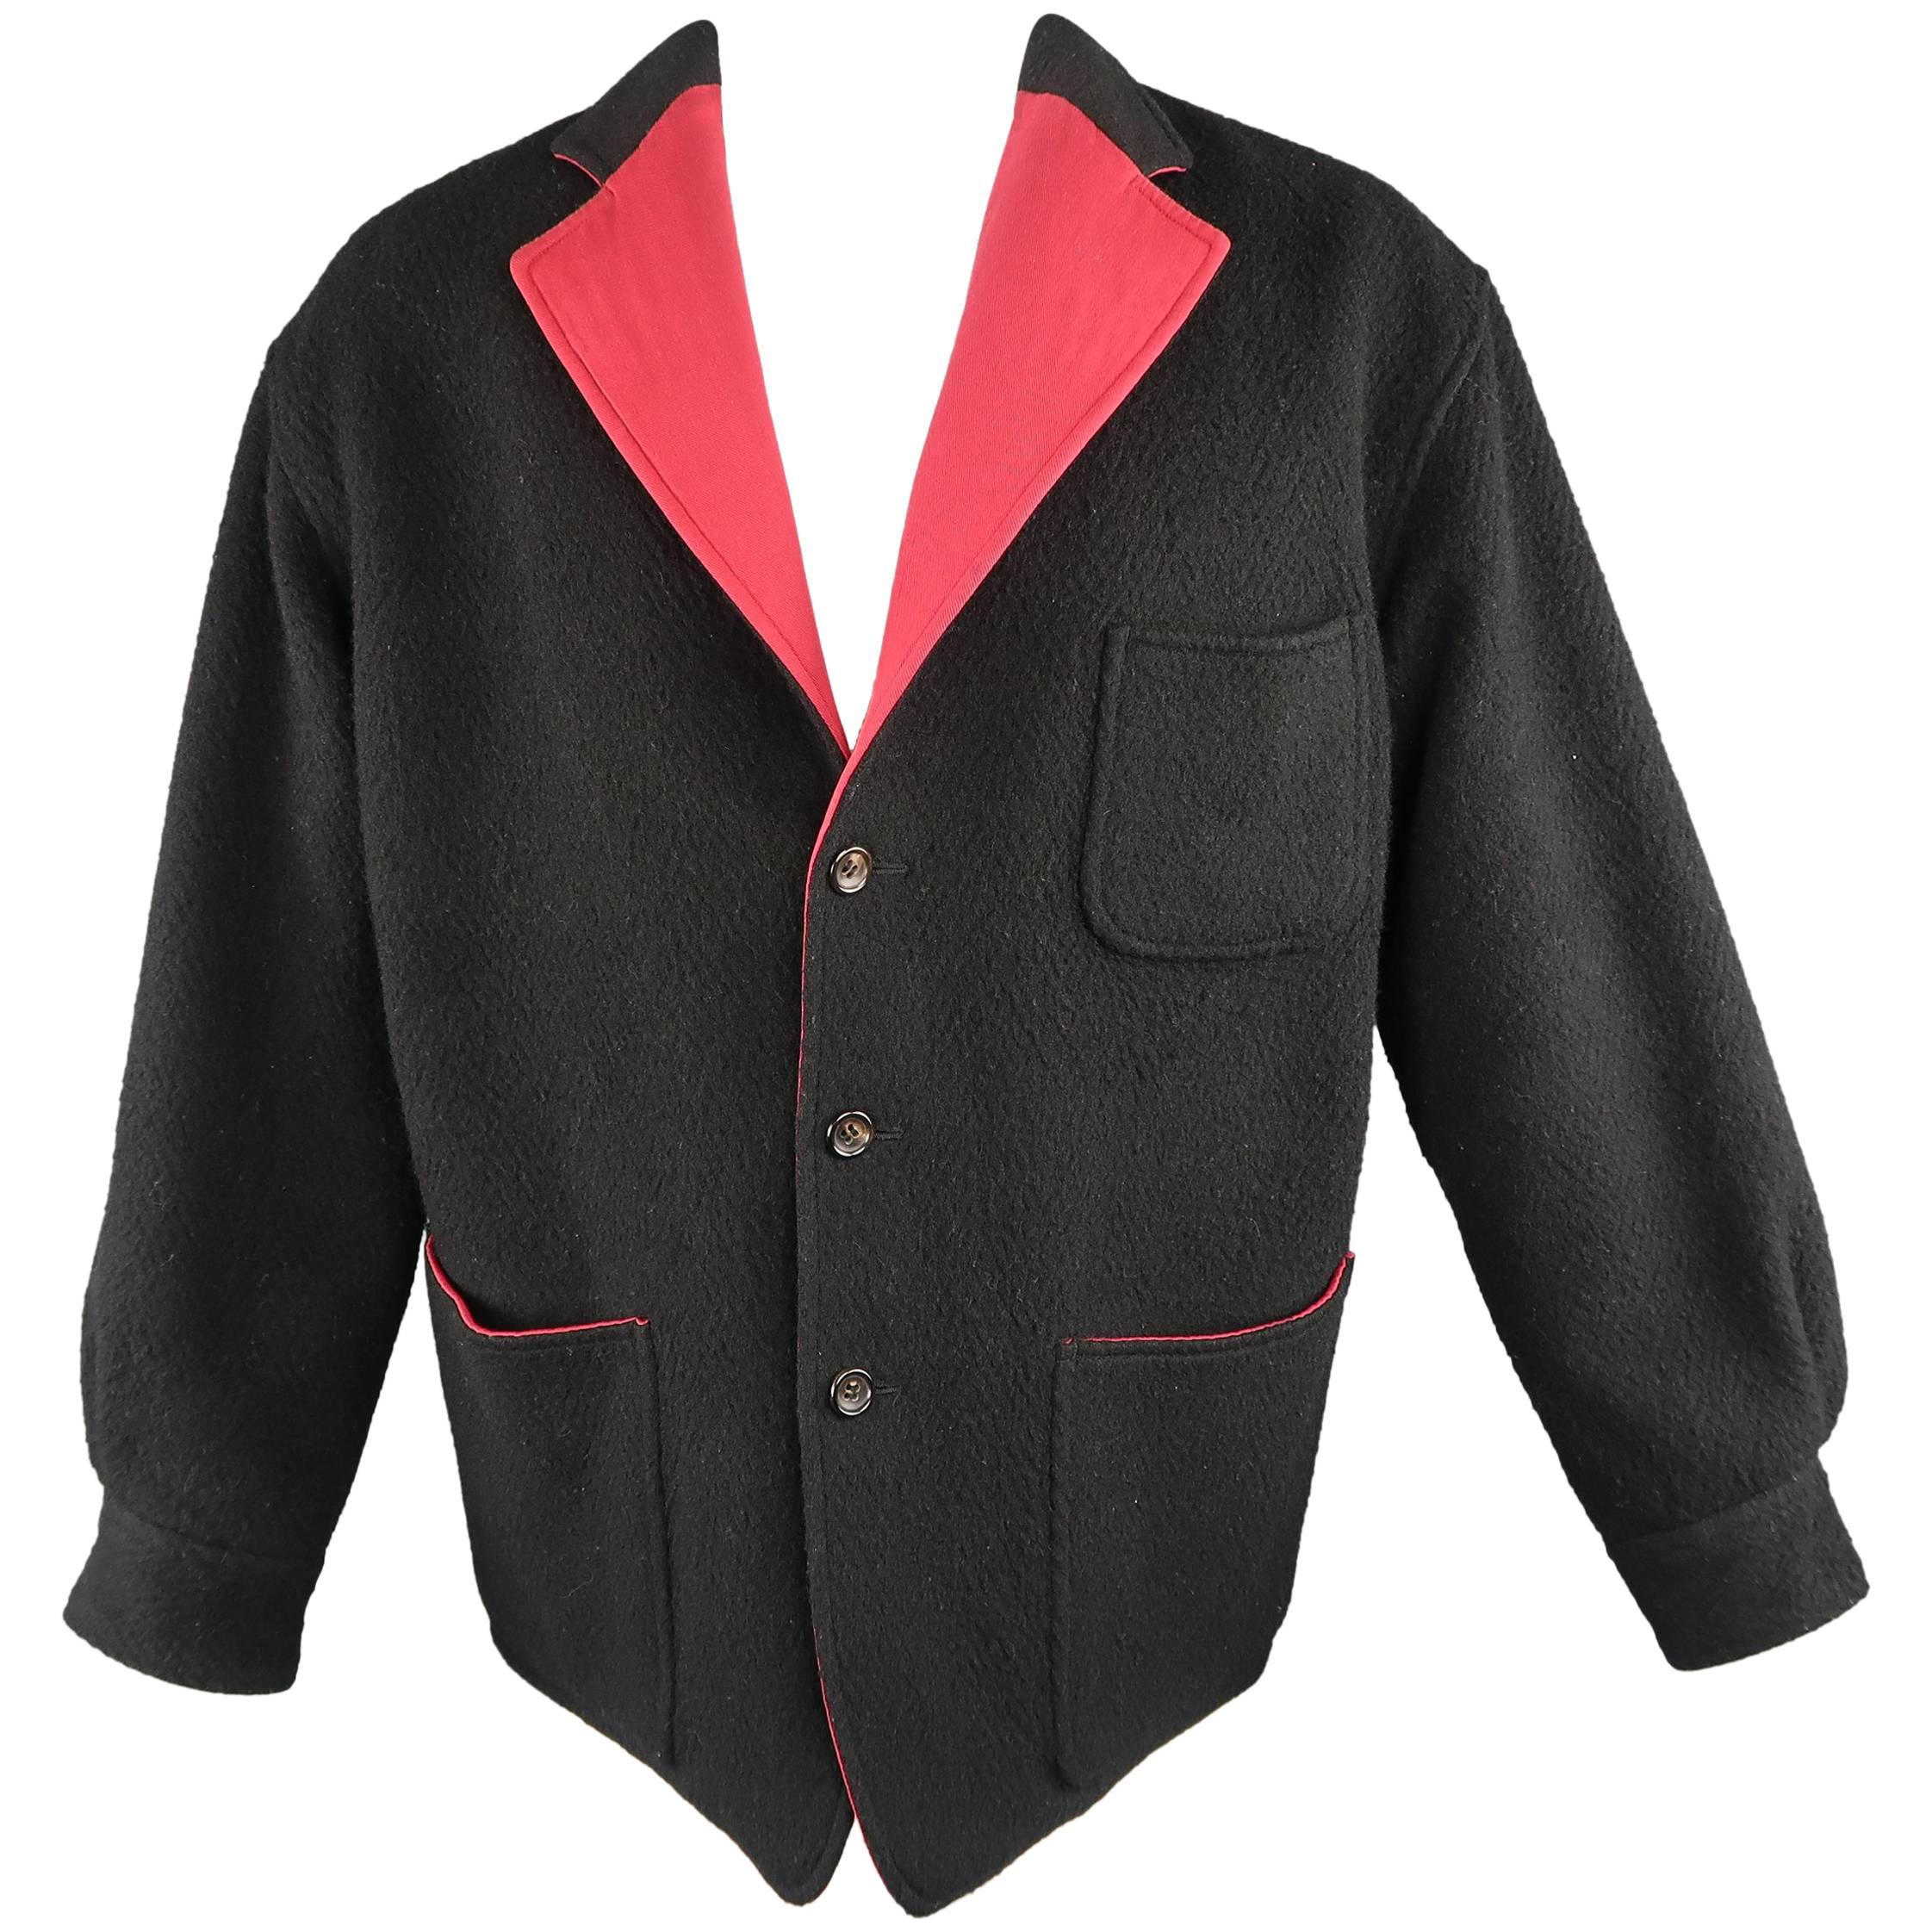 Men's COMME des GARCONS M Textured Black Wool & Red Twill Reversible Jacket